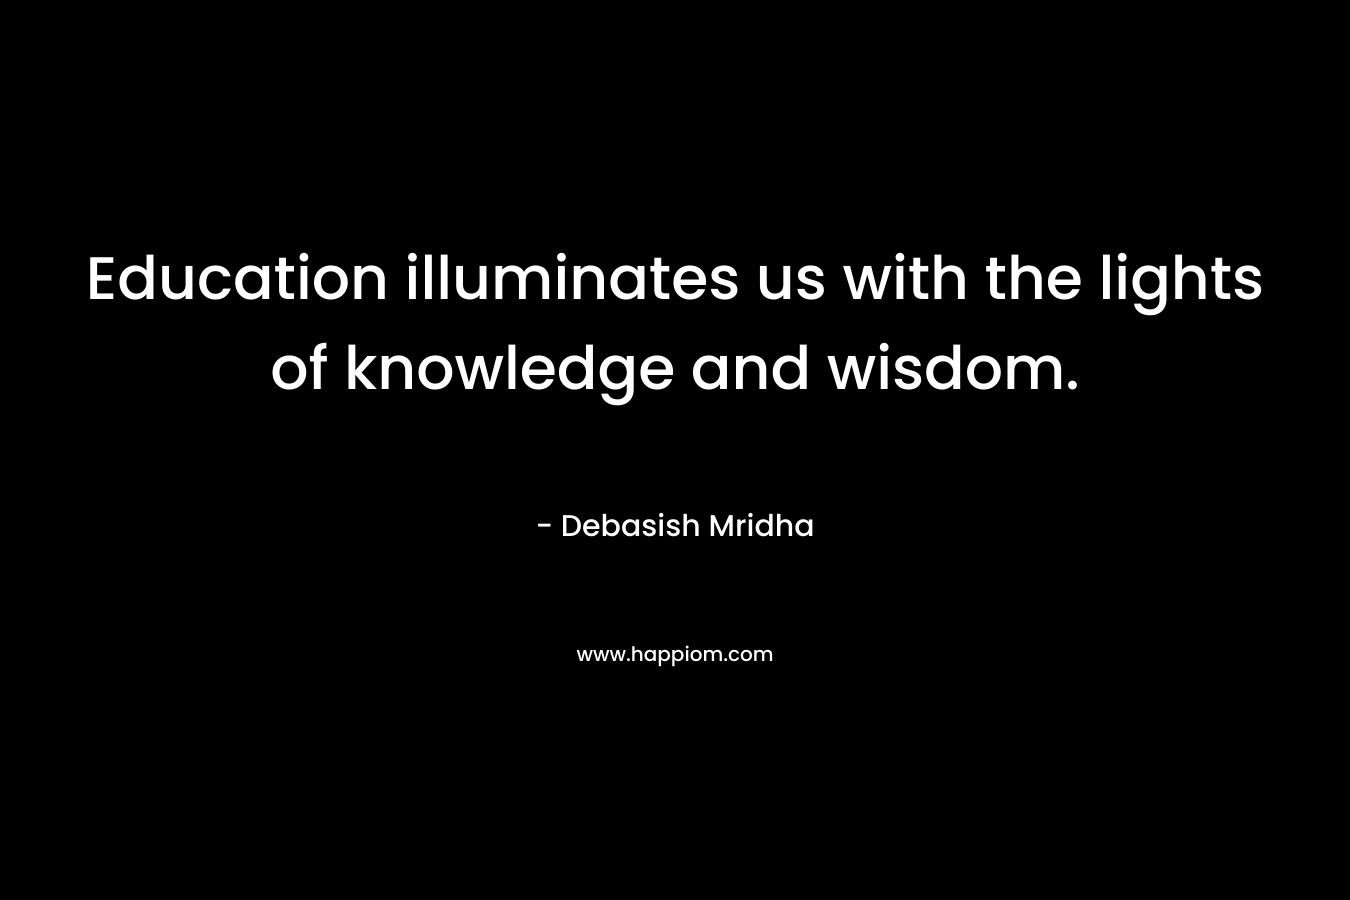 Education illuminates us with the lights of knowledge and wisdom.